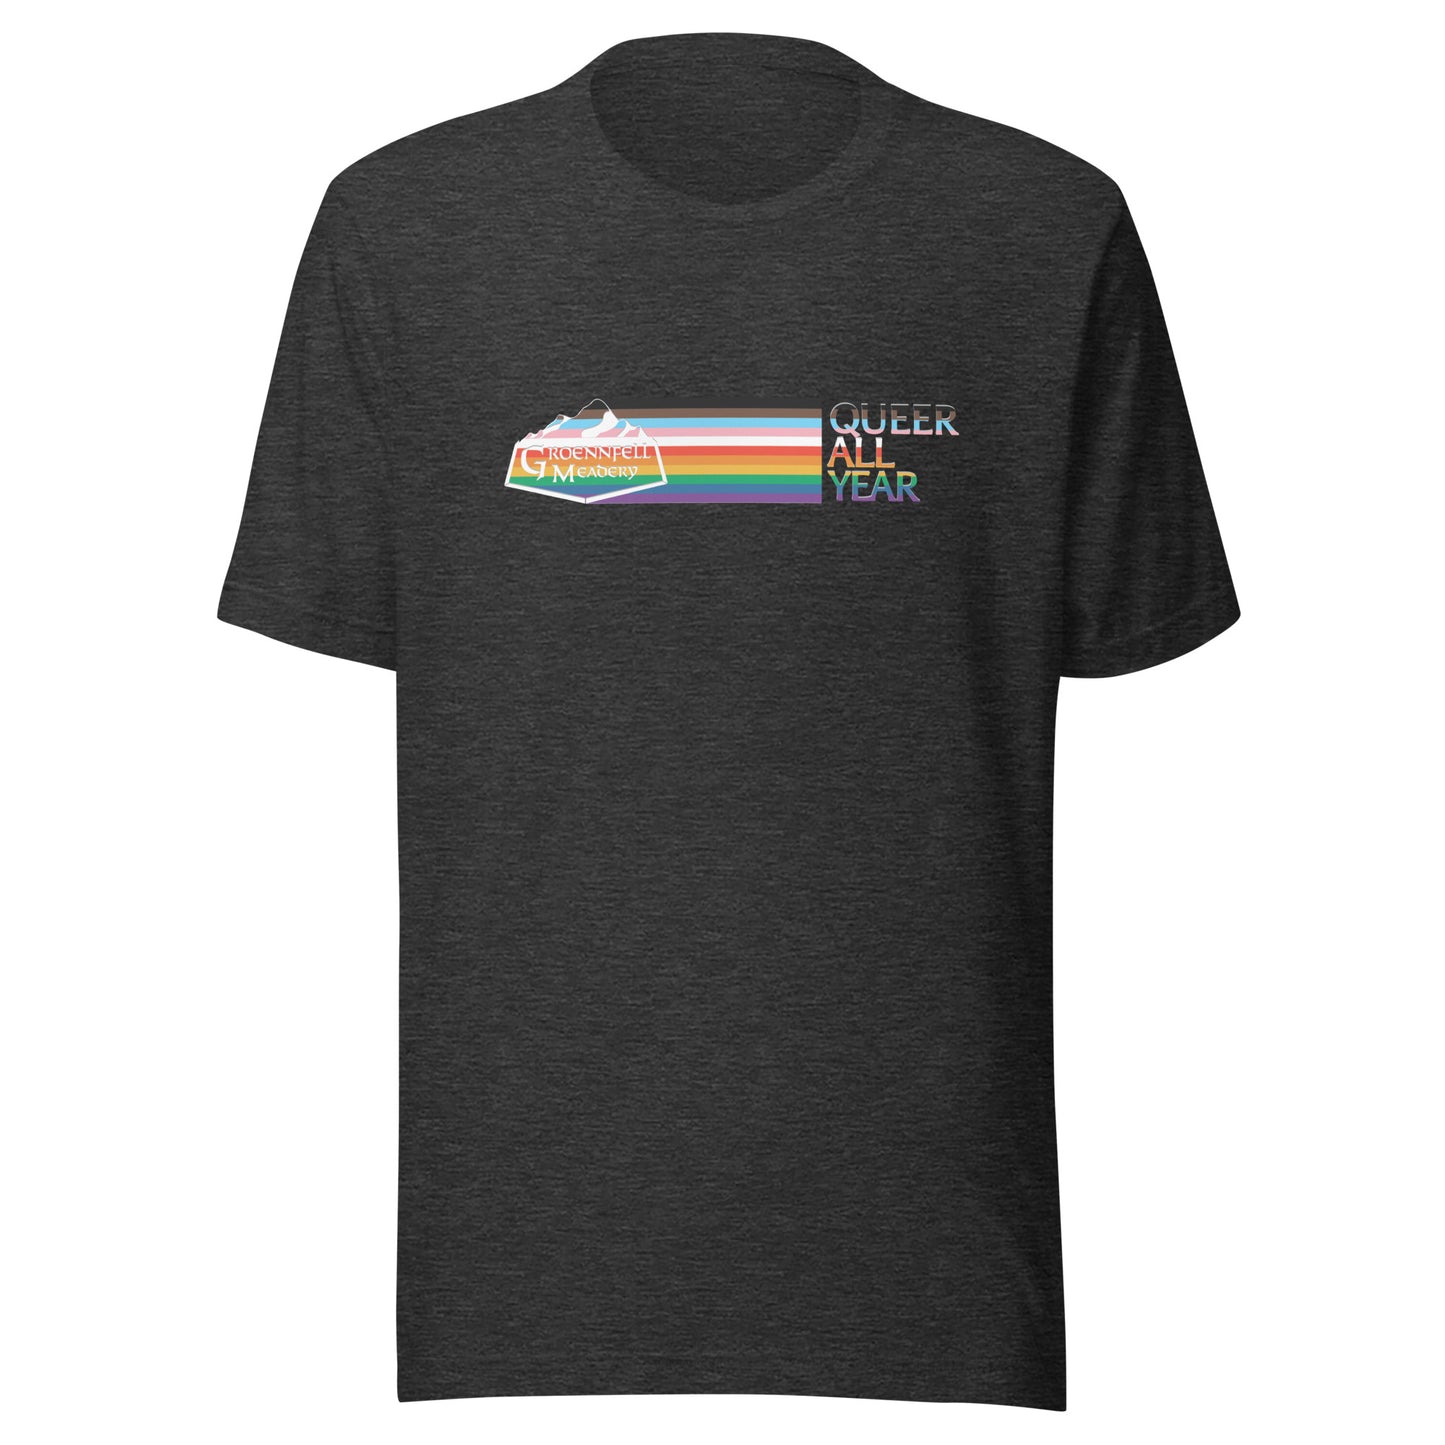 Flying Rainbow Super Soft Logo T-Shirt - "Queer All Year"